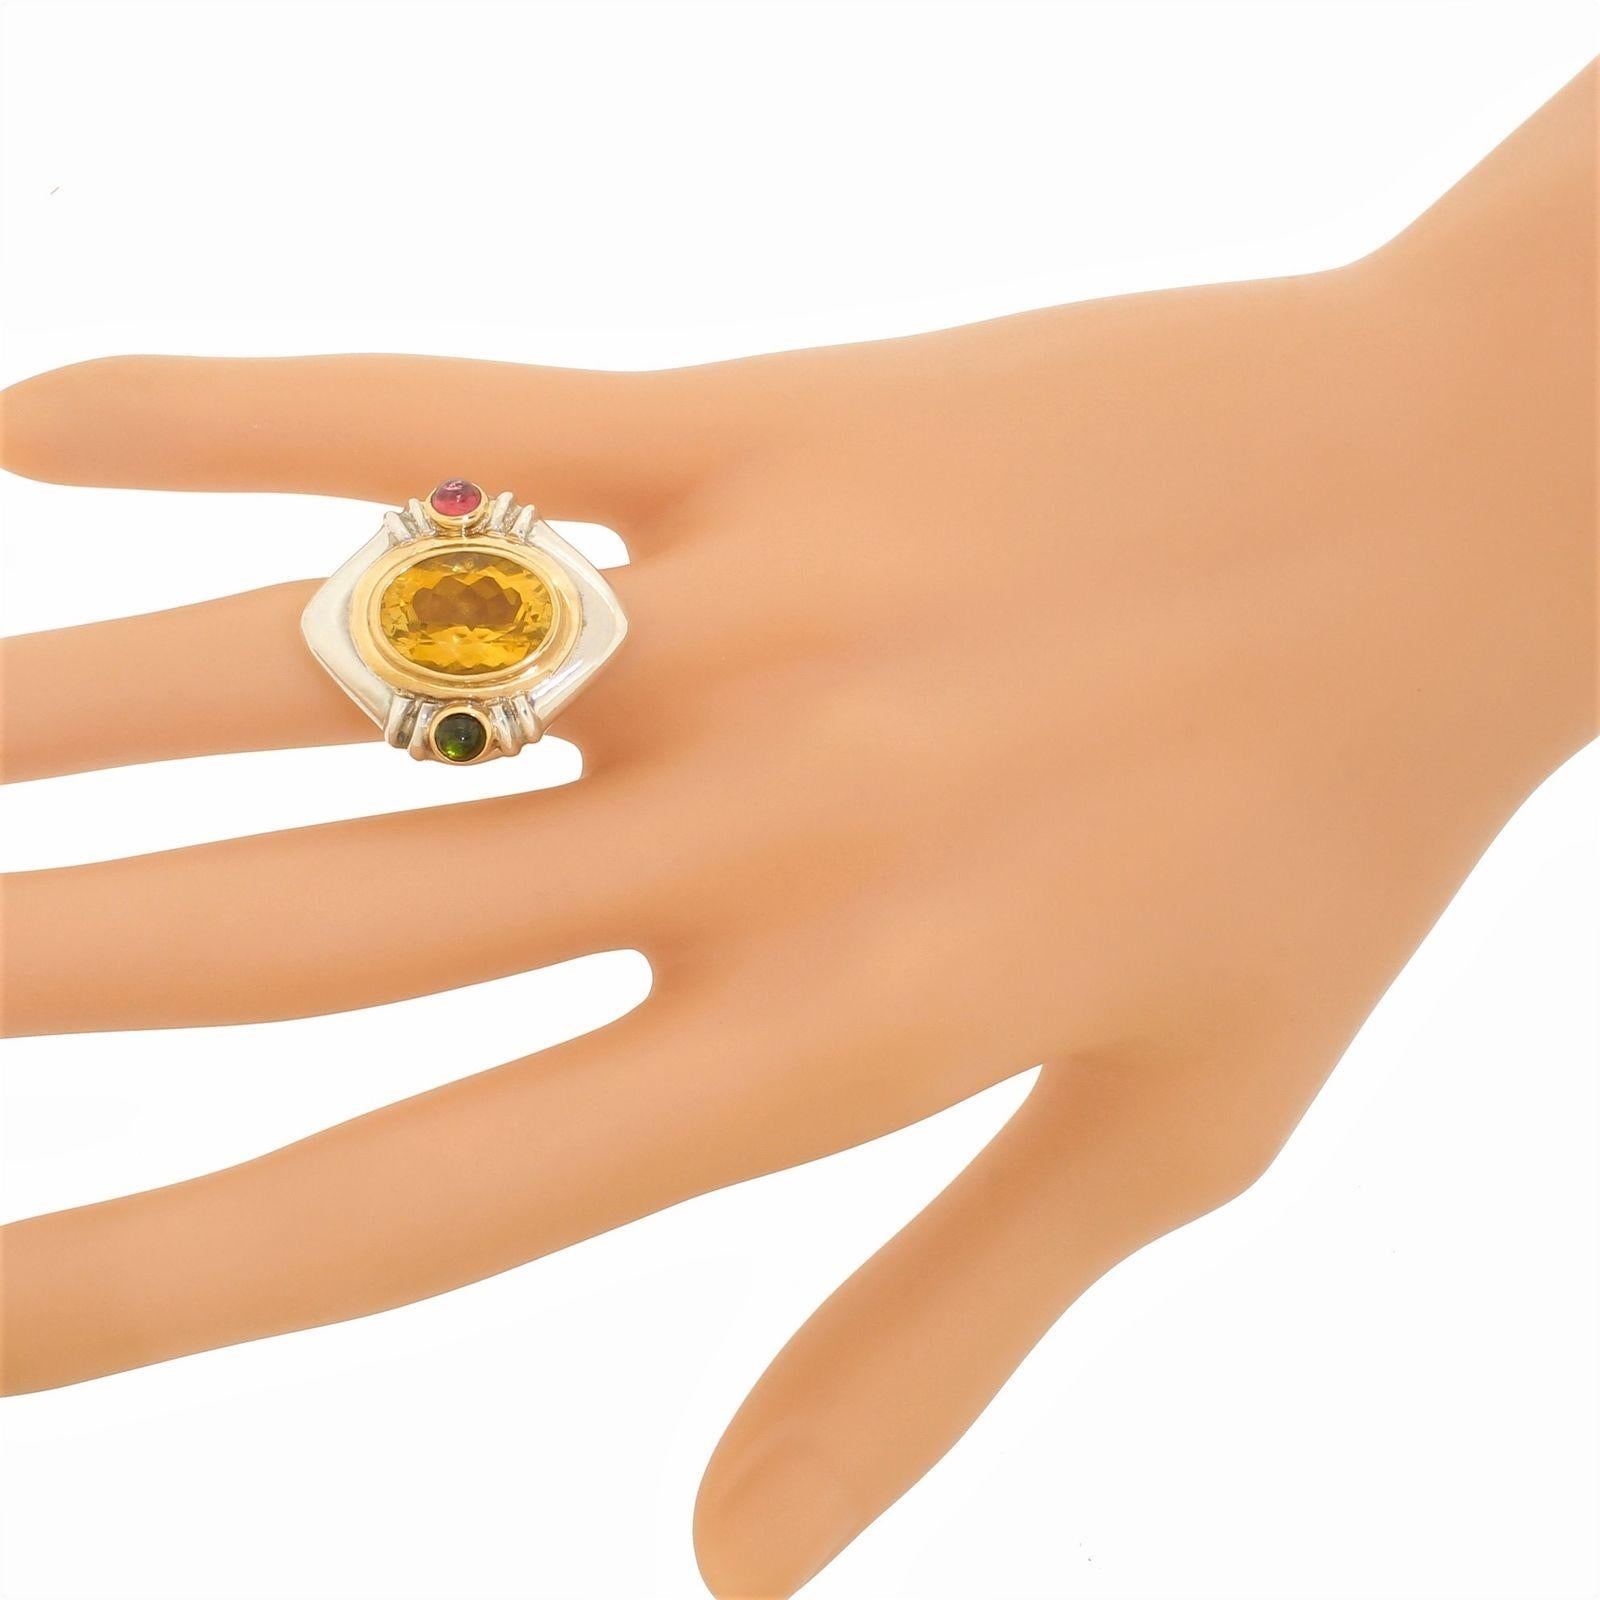 We are happy to offer this fantastic piece of Mazza New York jewelry, it is a large ring that is gorgeous in person.
This piece was advertised in Vogue Magazine in 1989 ( please see photo's) 
In the center lies  a large sparkling Citrine stone which